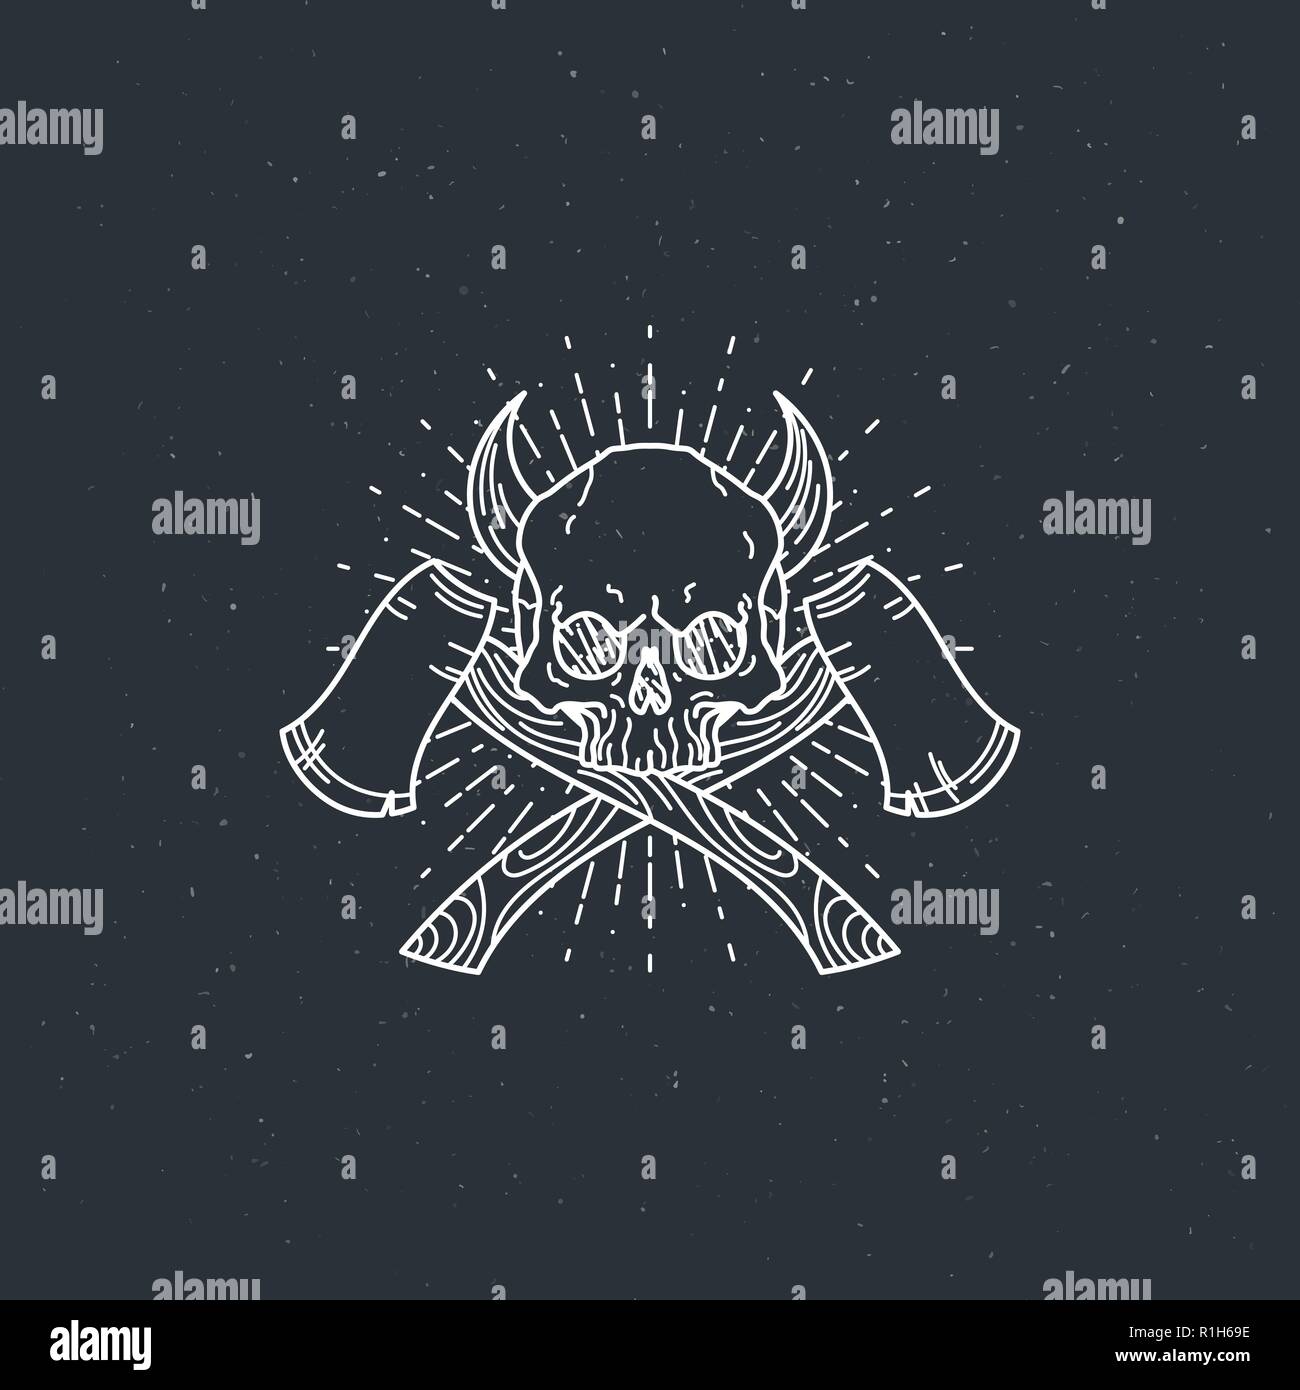 Vector illustration of black and white tattoo graphic human skull with axes and horns. Lined symbol Stock Vector